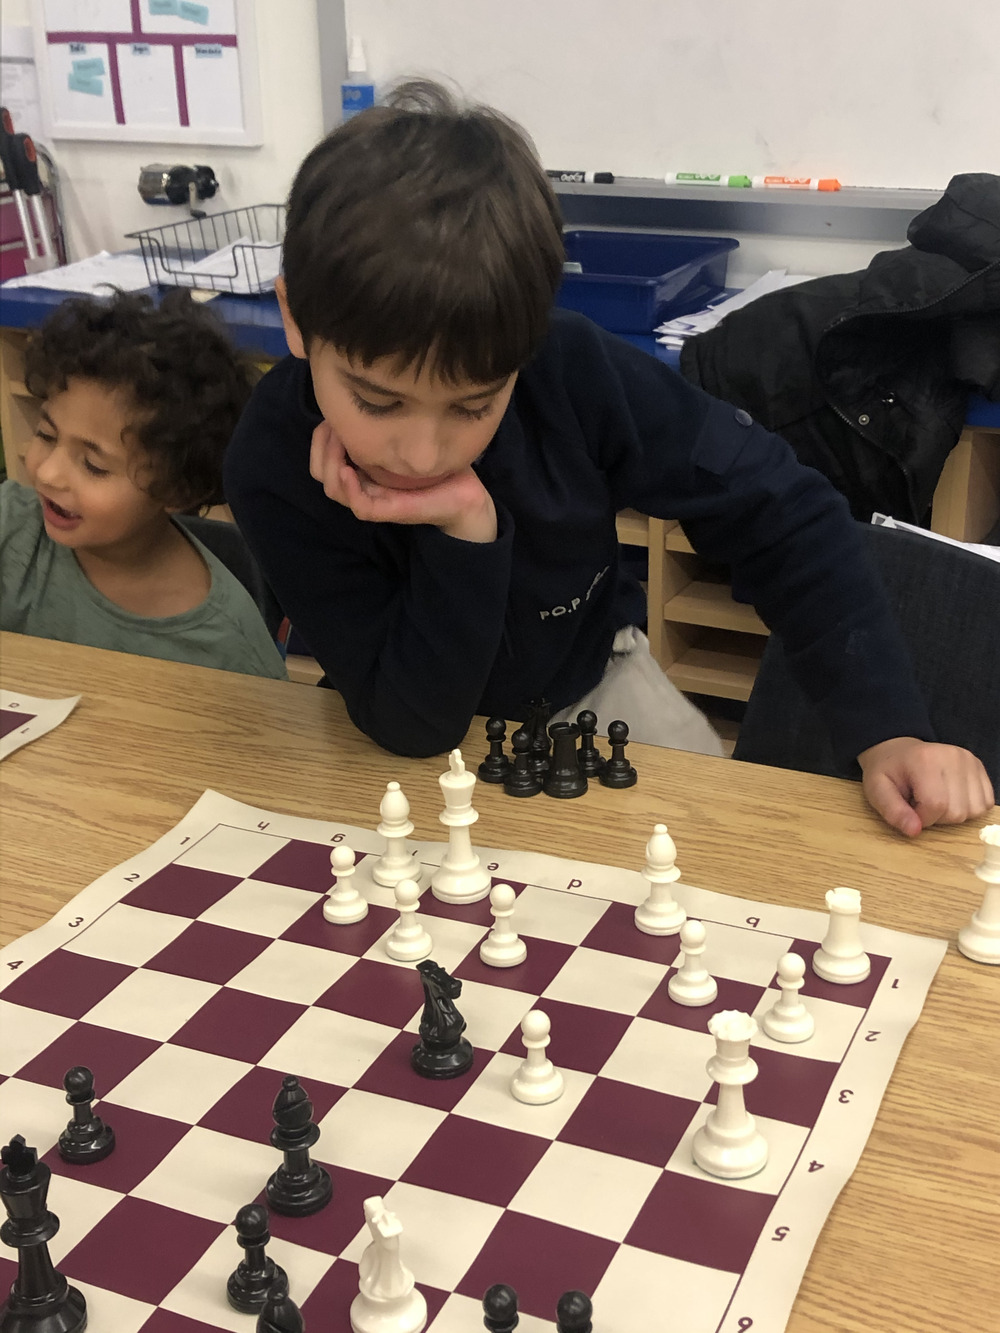 JUNIOR CHESS - Play Online for Free!